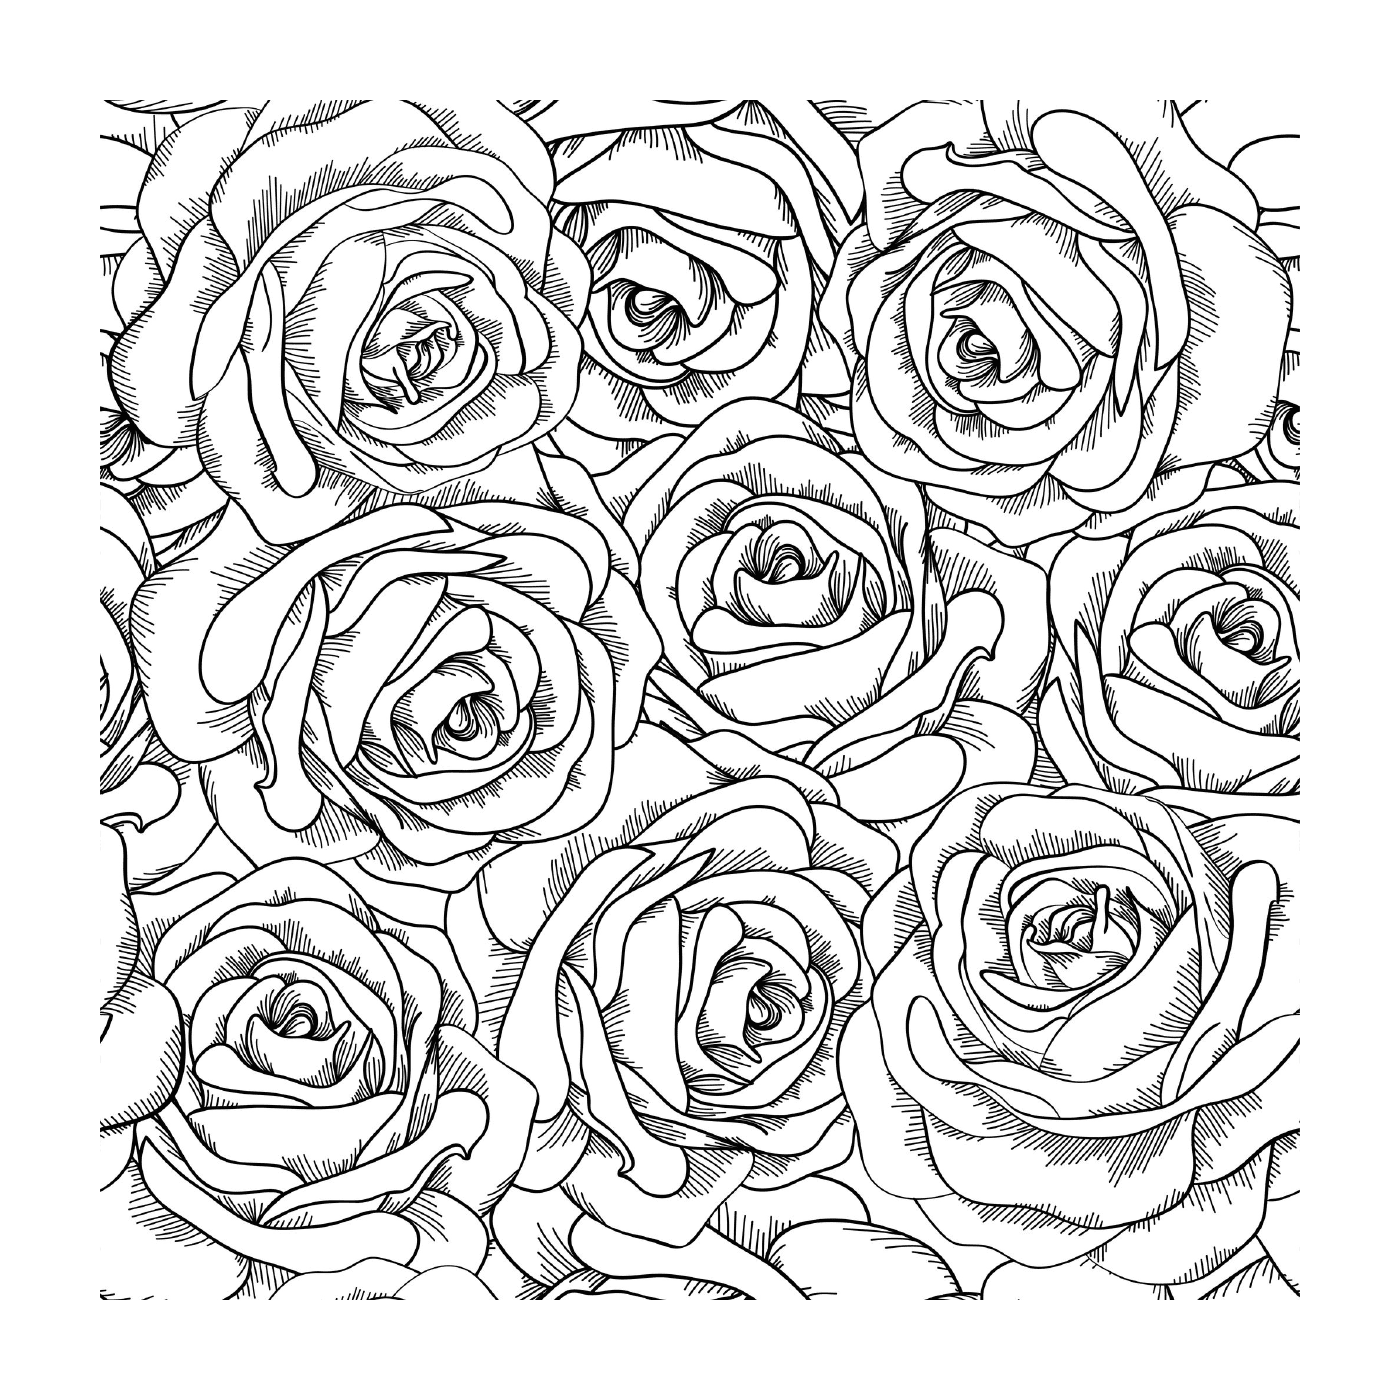  Doodle Roses, amor colorido 